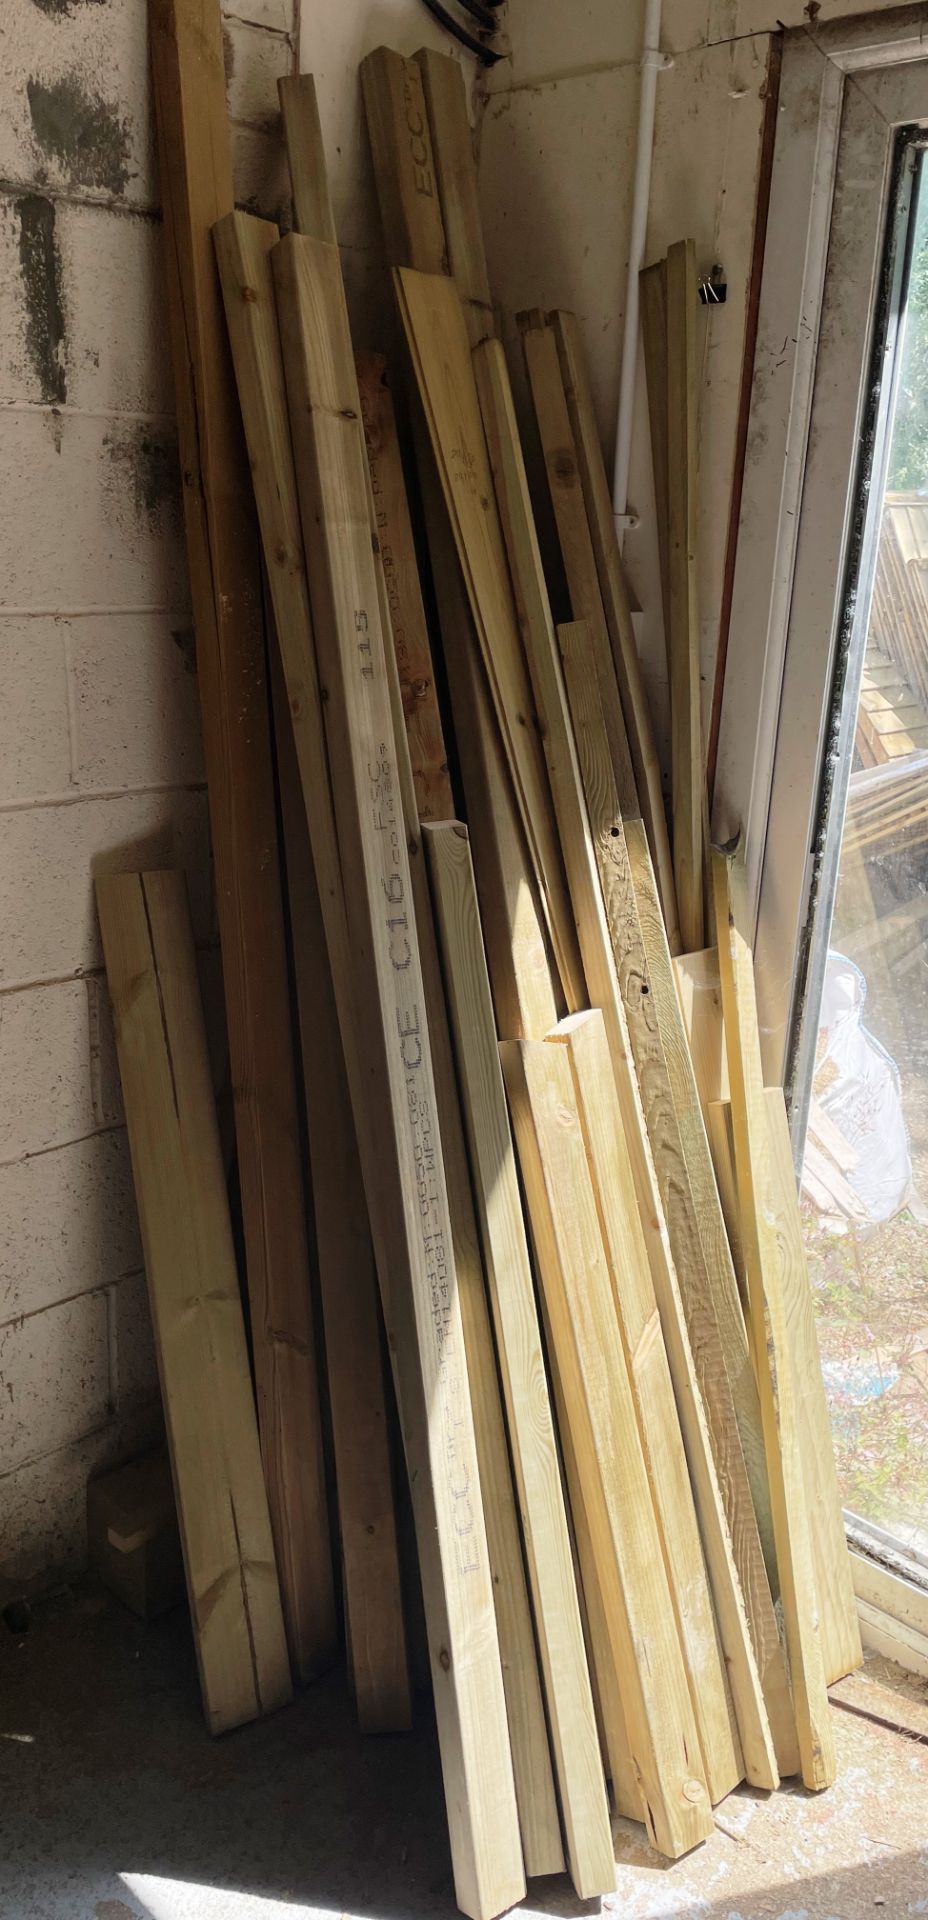 Quantity of Wood Stock & Metal Sheeting | As Pictured (Inside Unit) - Image 6 of 7